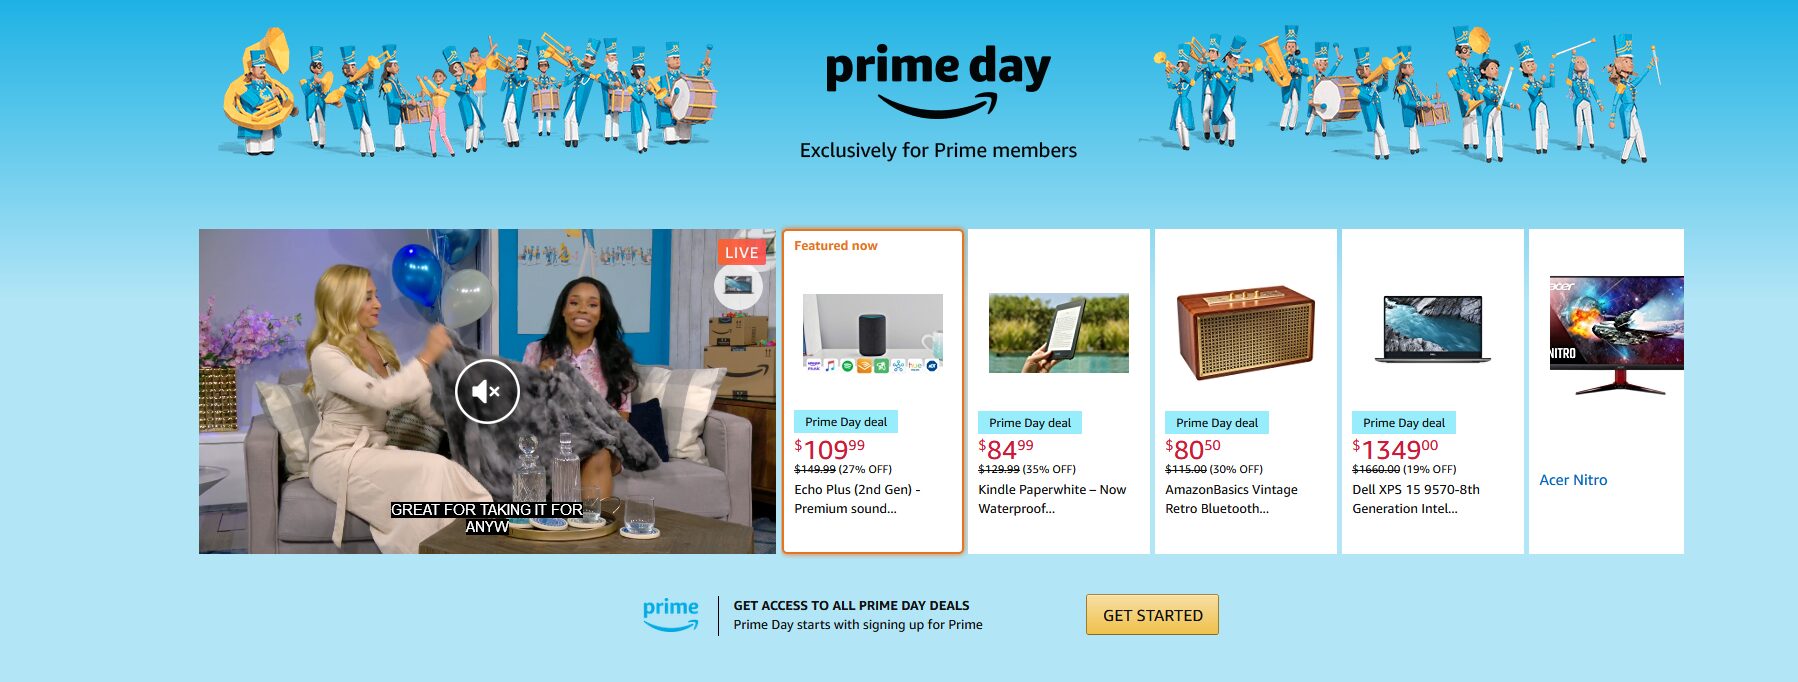 GAMbIT Picks: The Best Of Prime Day 2019